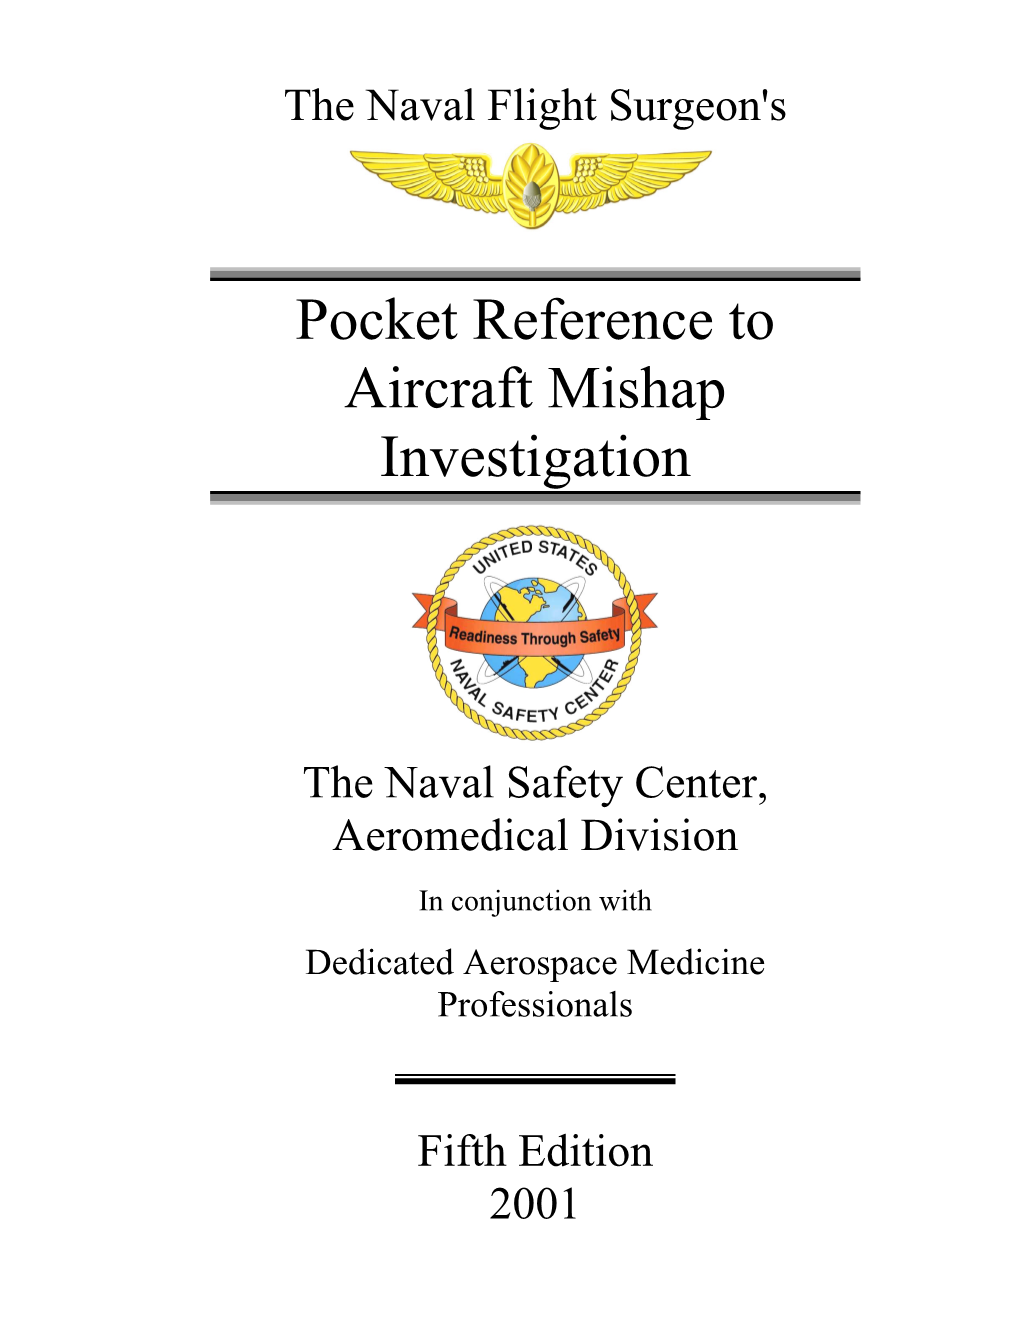 Pocket Reference to Aircraft Mishap Investigation